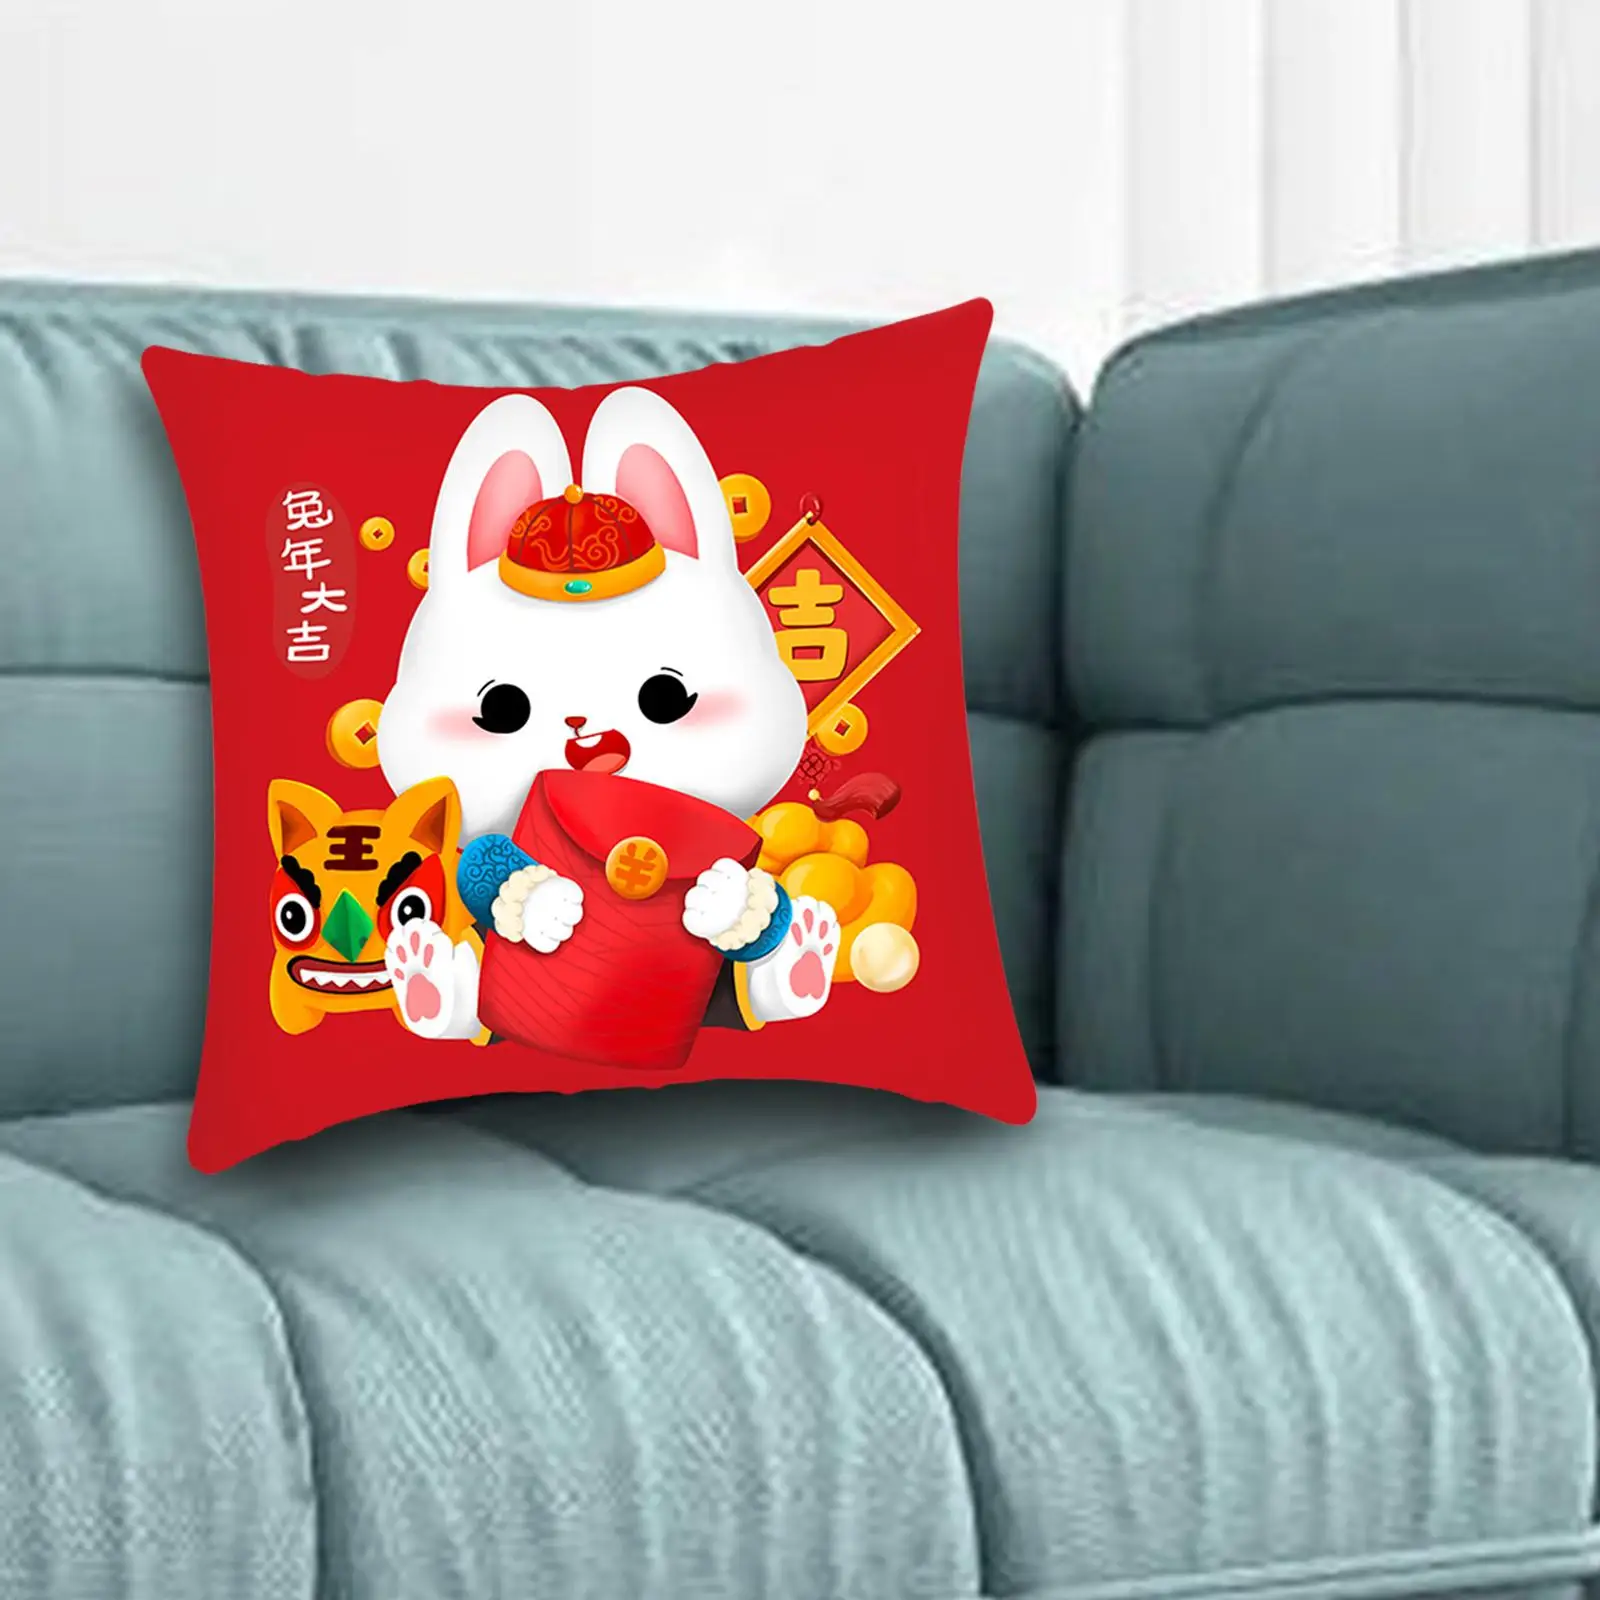 Cushion Cover Rabbit Printed Throw Pillow Covers for Sping Festival Wedding